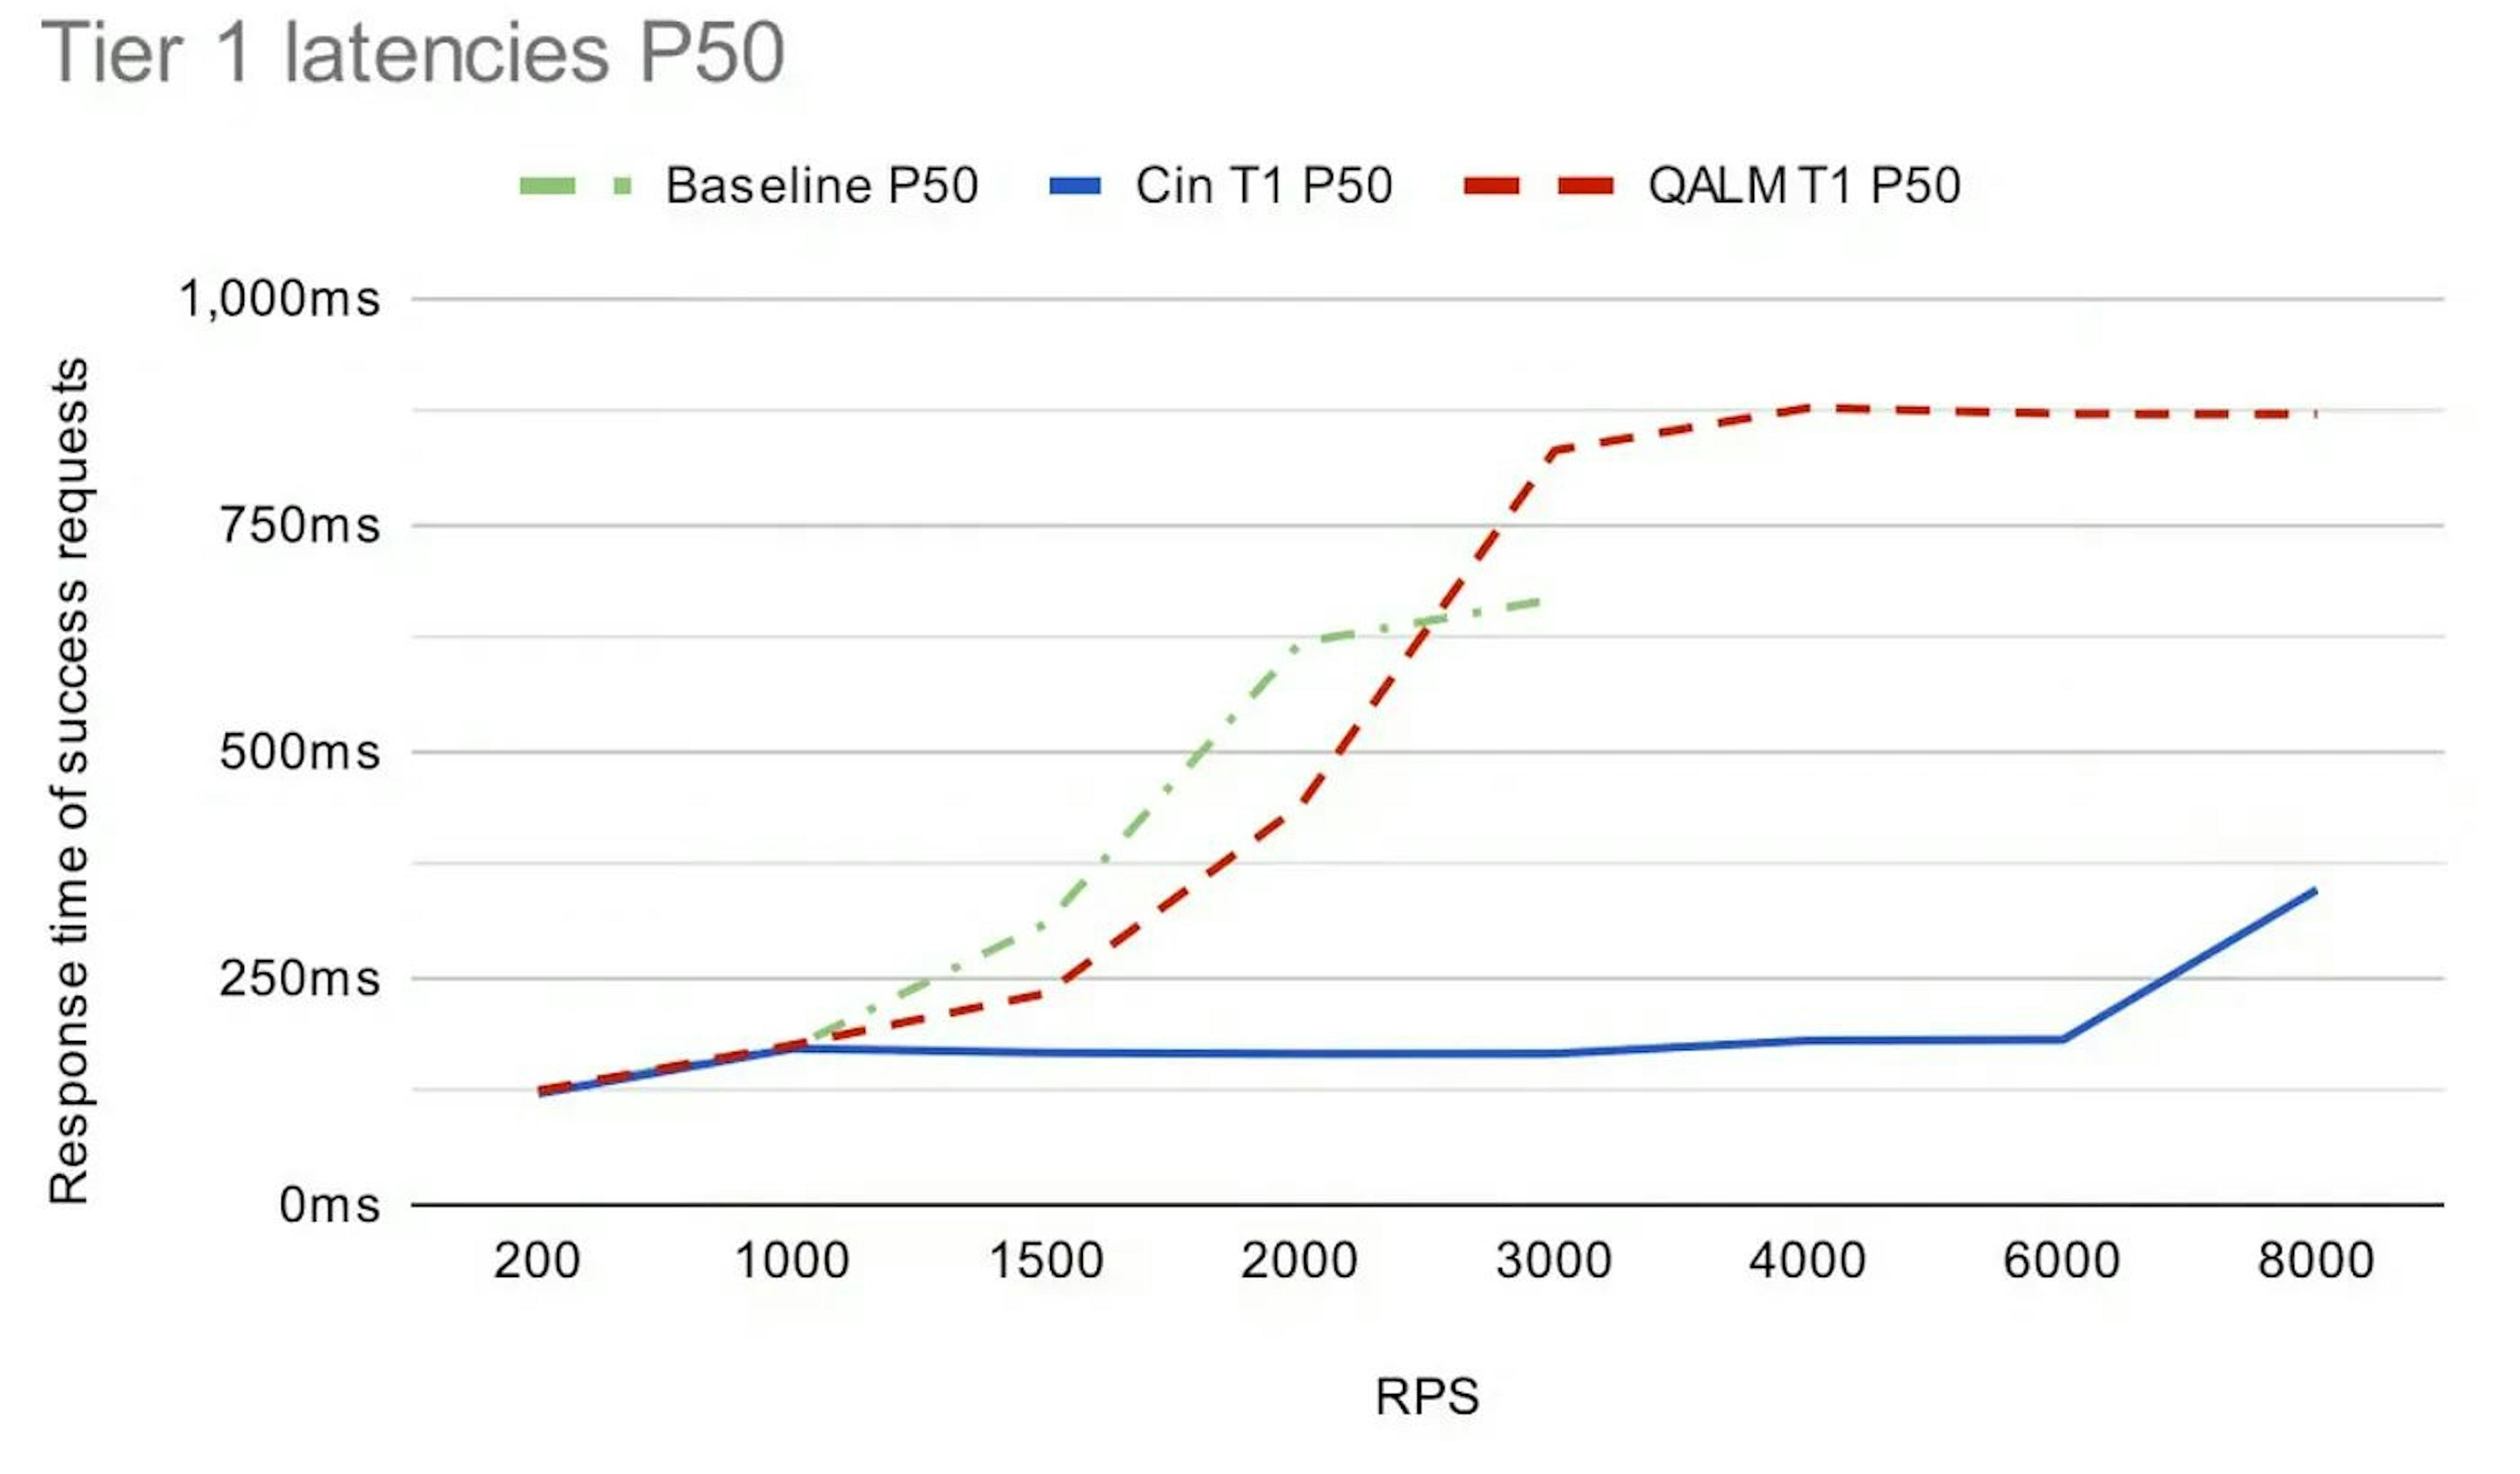 P50 latencies for the high priority, tier 1, requests for the three setup at different inbound RPS. (from the earlier mentioned Uber article).